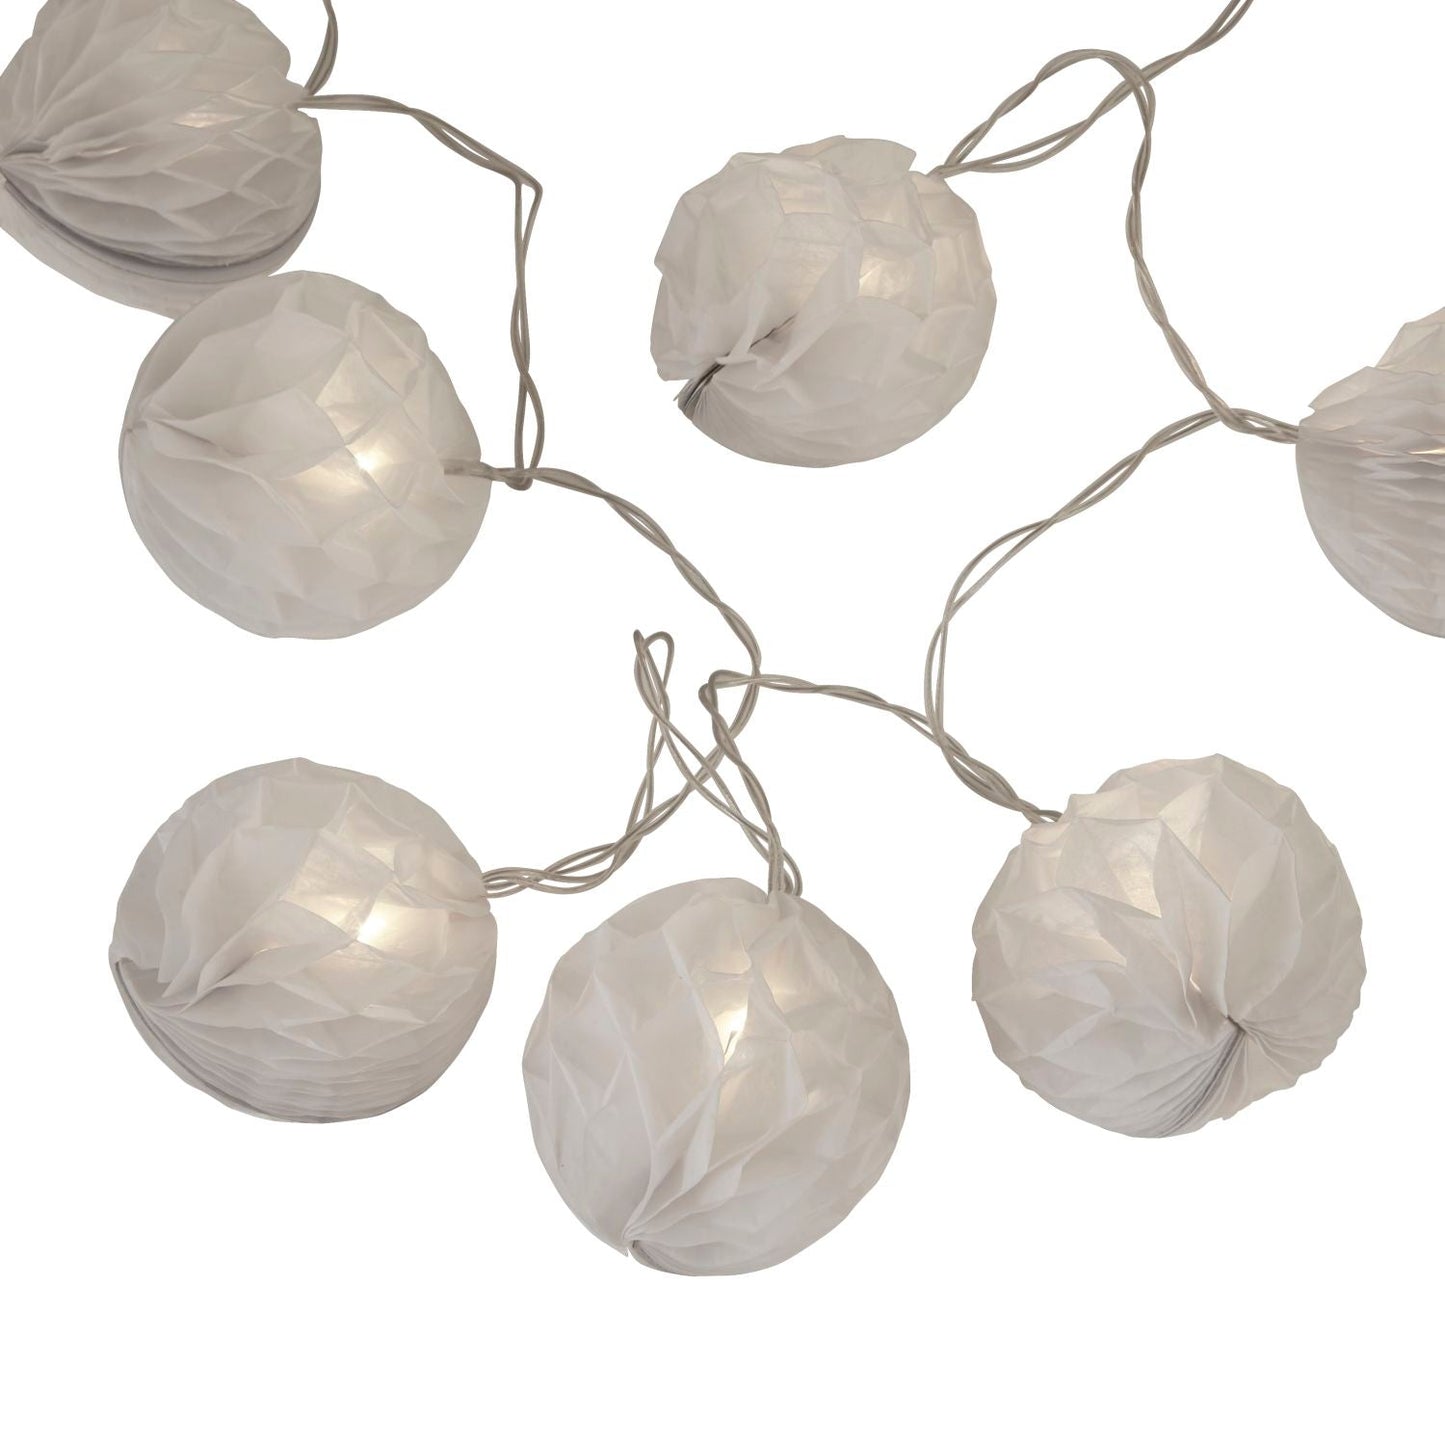 White Paper Shade String Lights